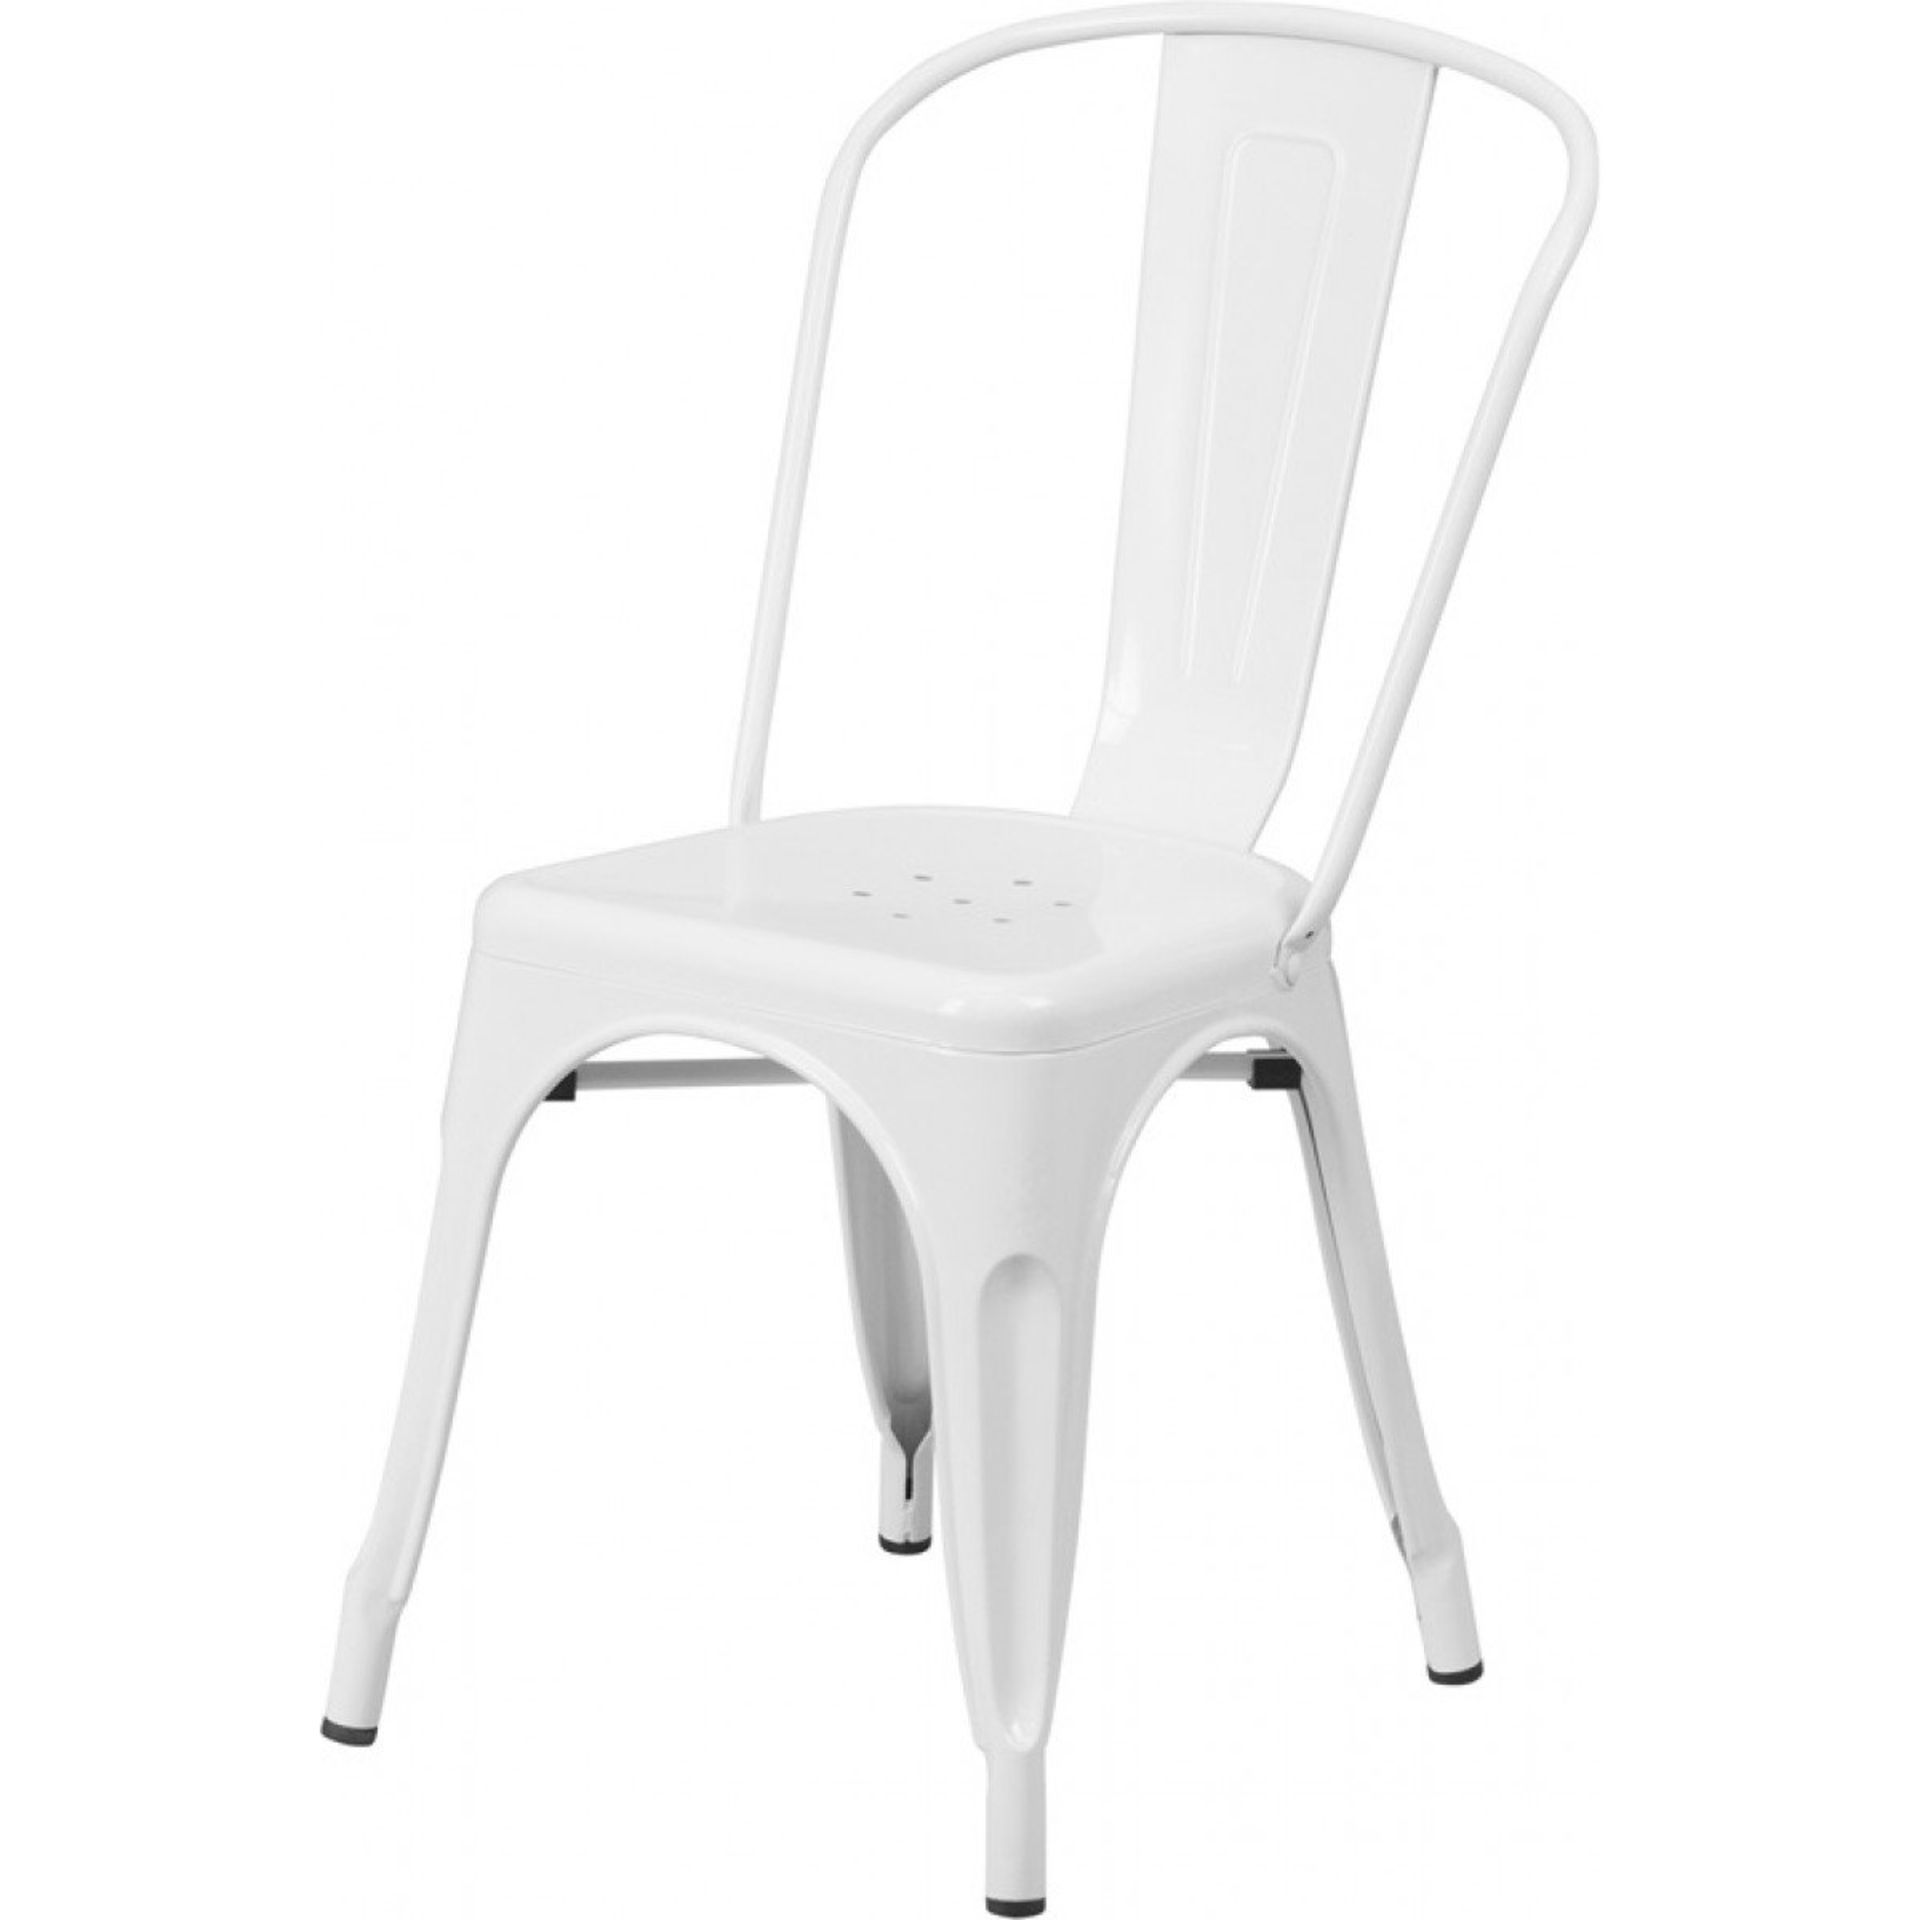 1 x Tolix Industrial Style Outdoor Bistro Table and Chair Set in White- Includes 1 x Table and 4 x - Image 7 of 13